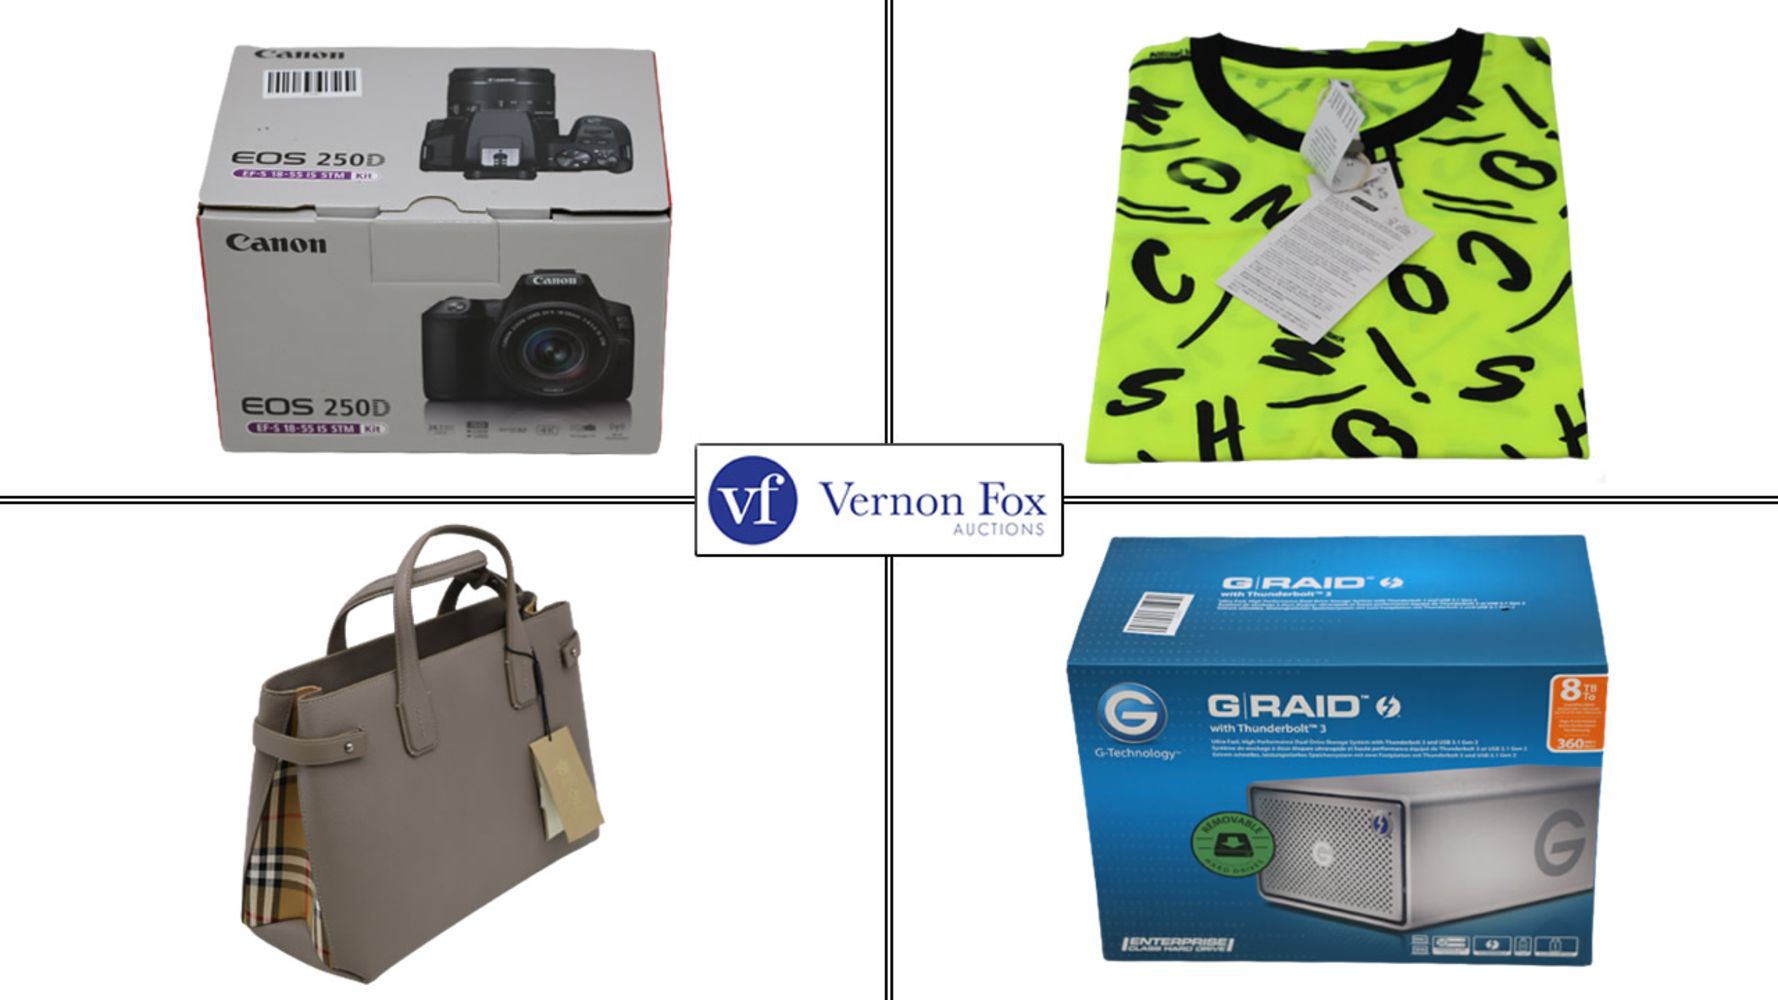 TIMED ONLINE AUCTION: A fantastic range of IT, Clothing, Cosmetics, Clothing and other Commercial and Industrial Goods, with FREE UK DELIVERY!